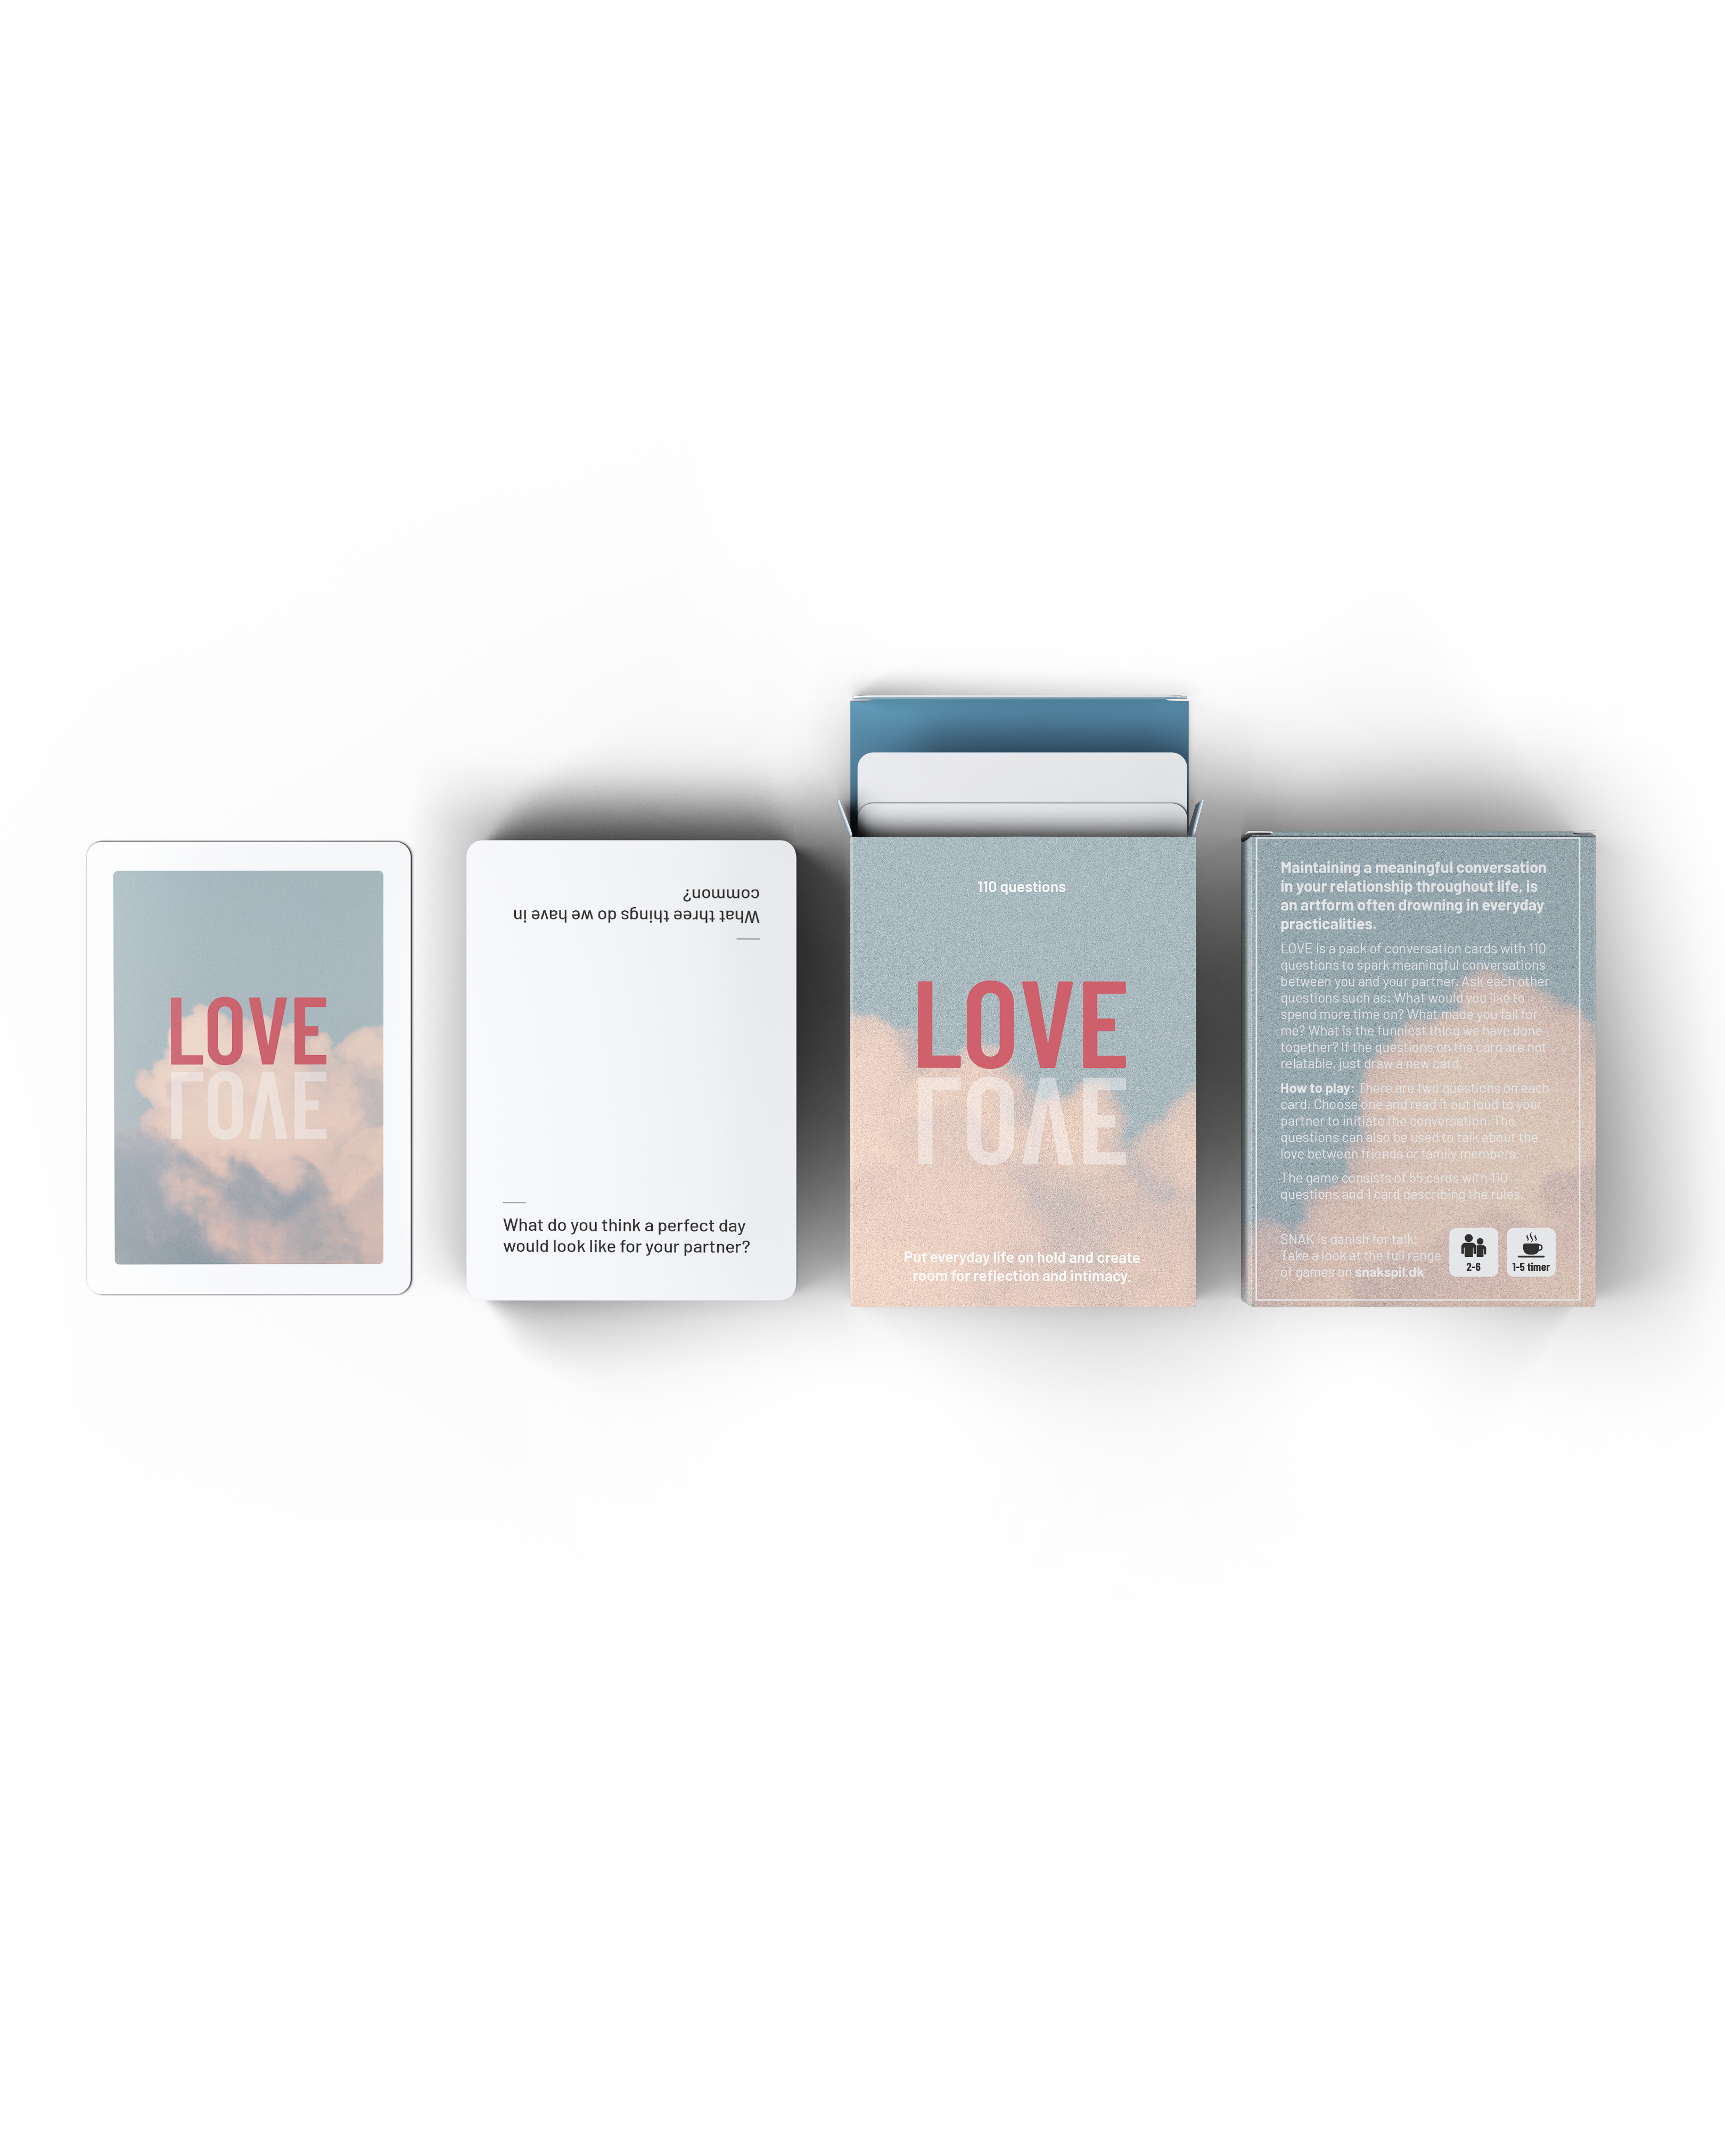 LOVE - Conversation cards that put everyday life on hold and create room for reflection and intimacy.